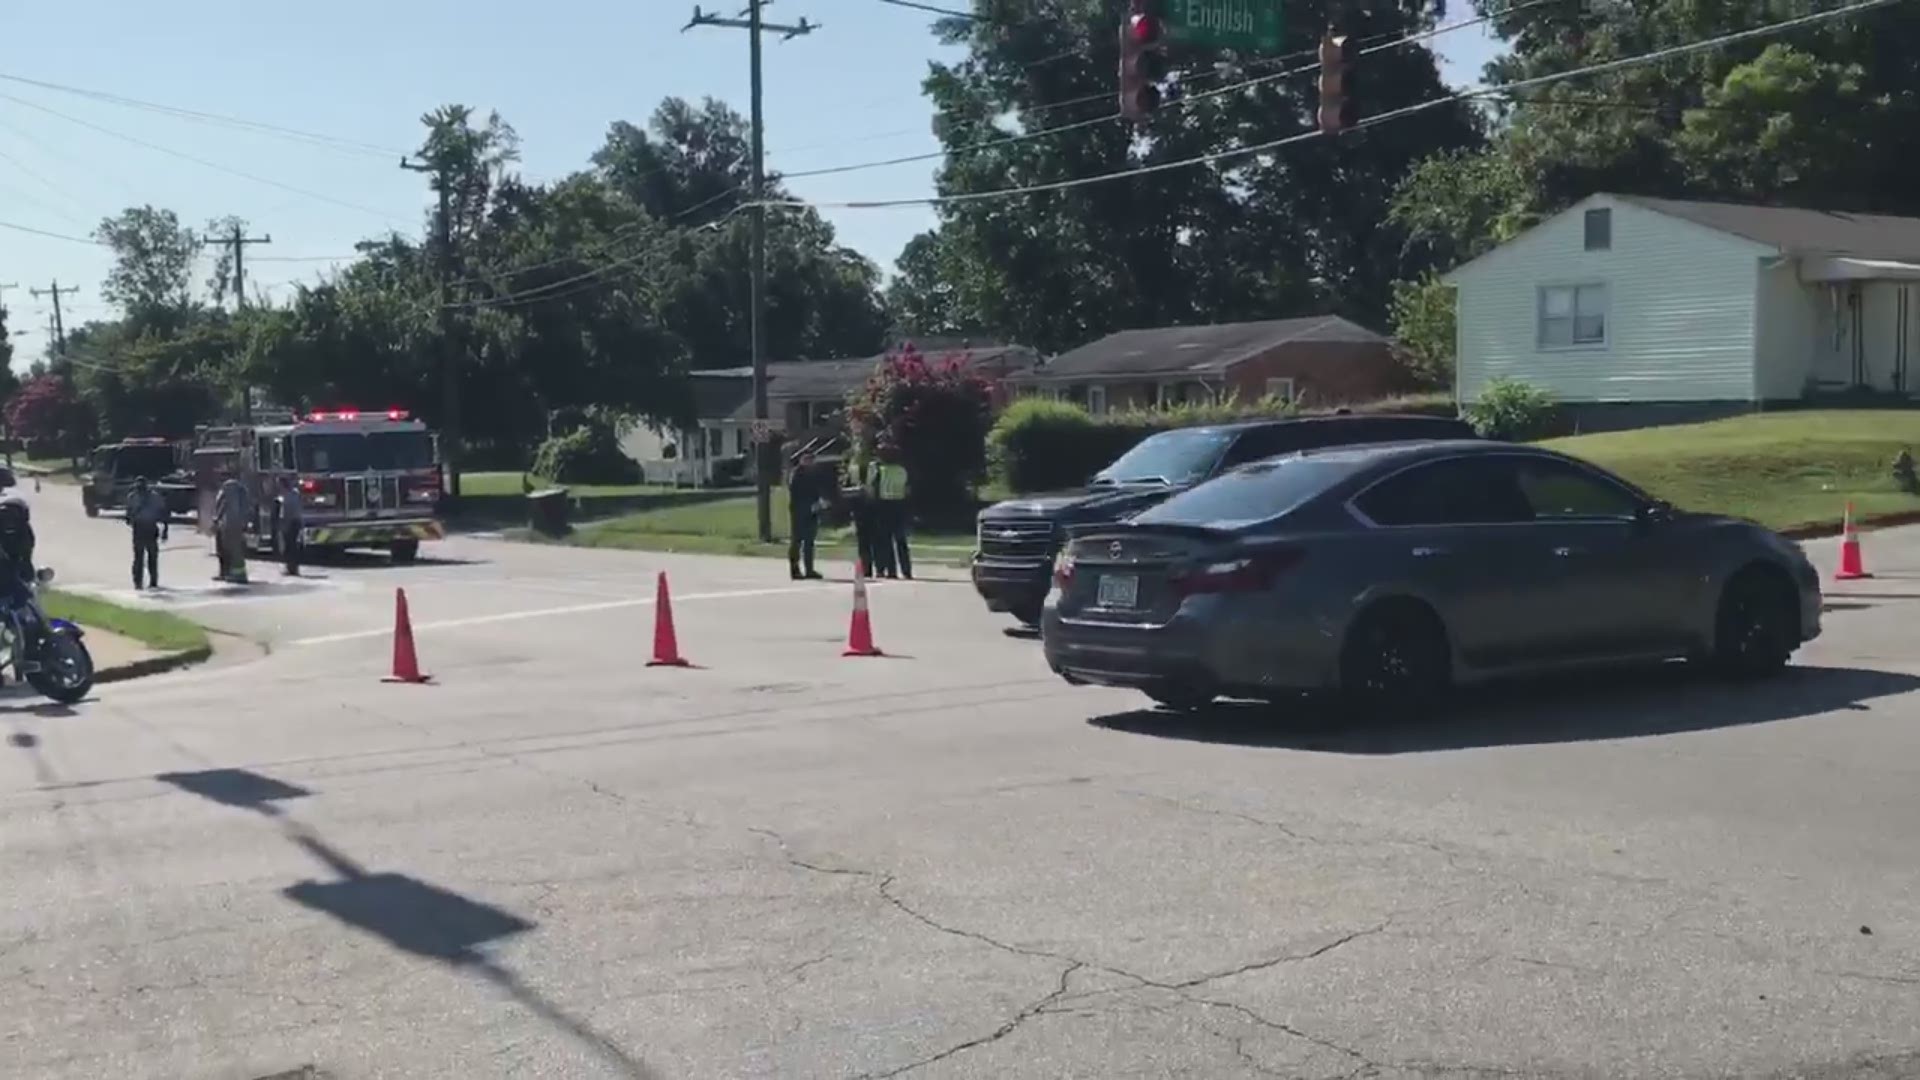 Police in Greensboro are investigating hit-and-run that killed a person on a motorcycle. The accident happened Thursday morning at the intersection of South English Street and McConnell Road.